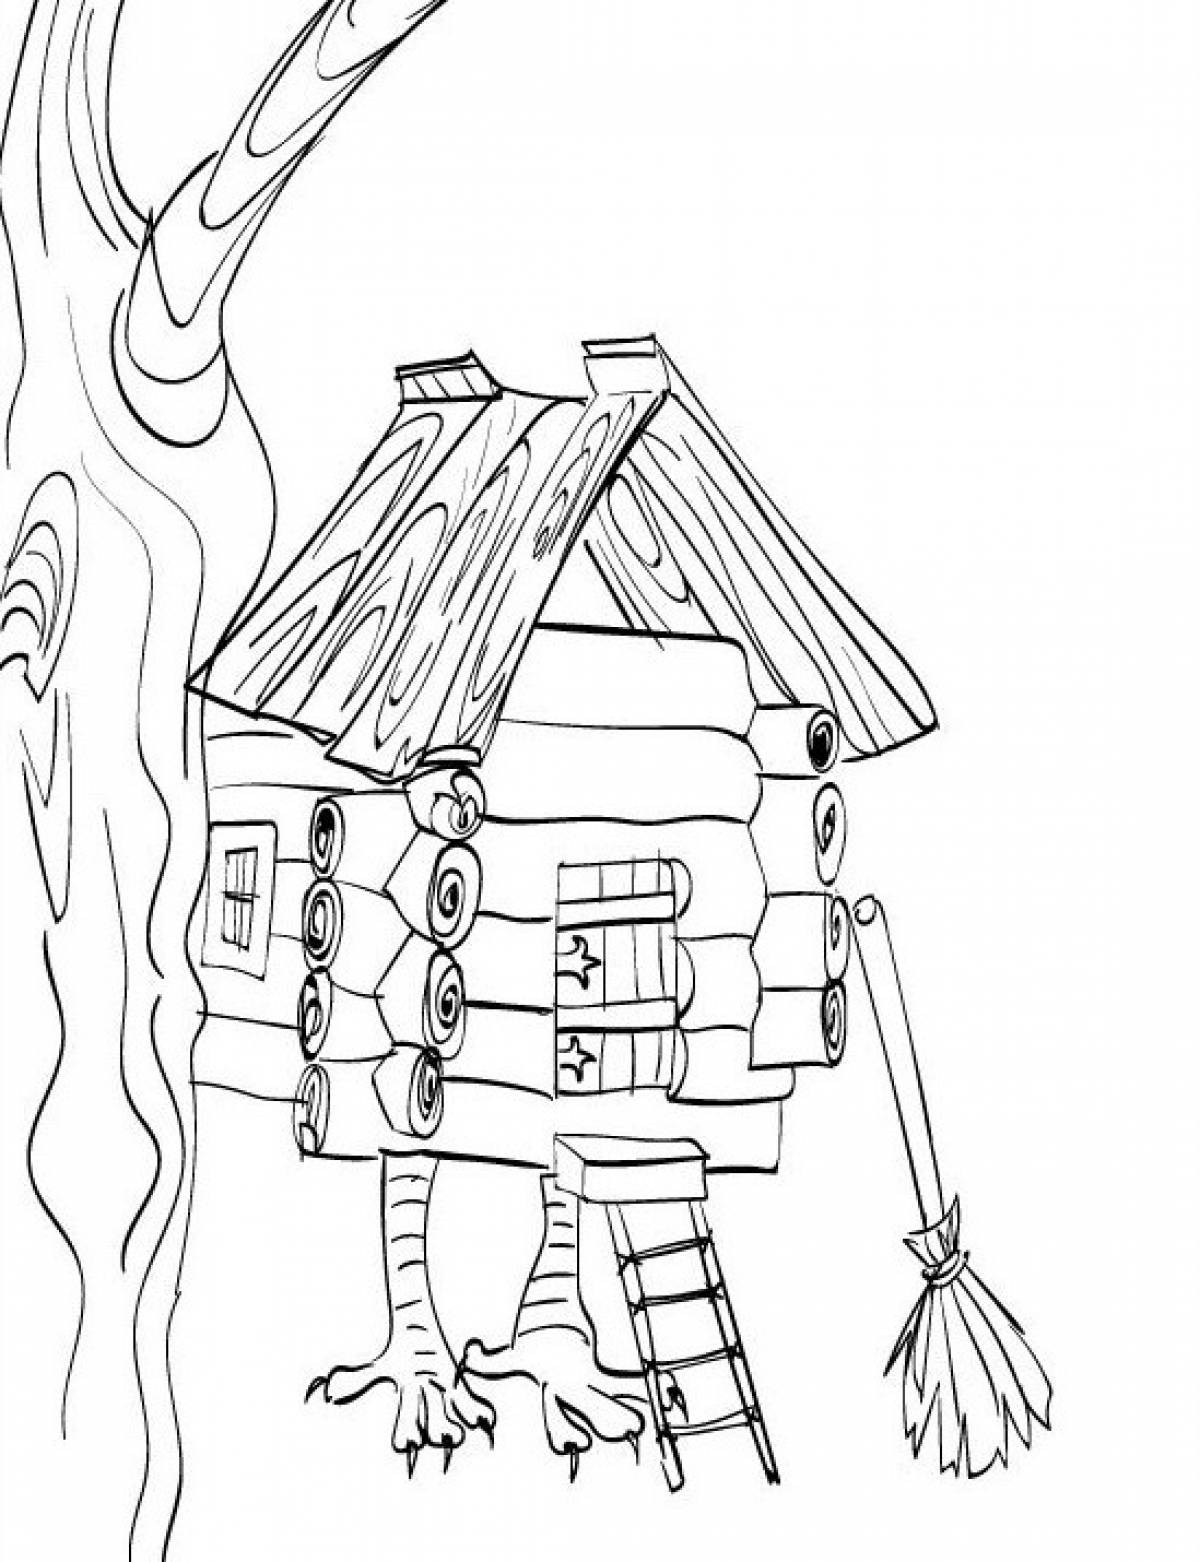 Hut on chicken legs and a broom